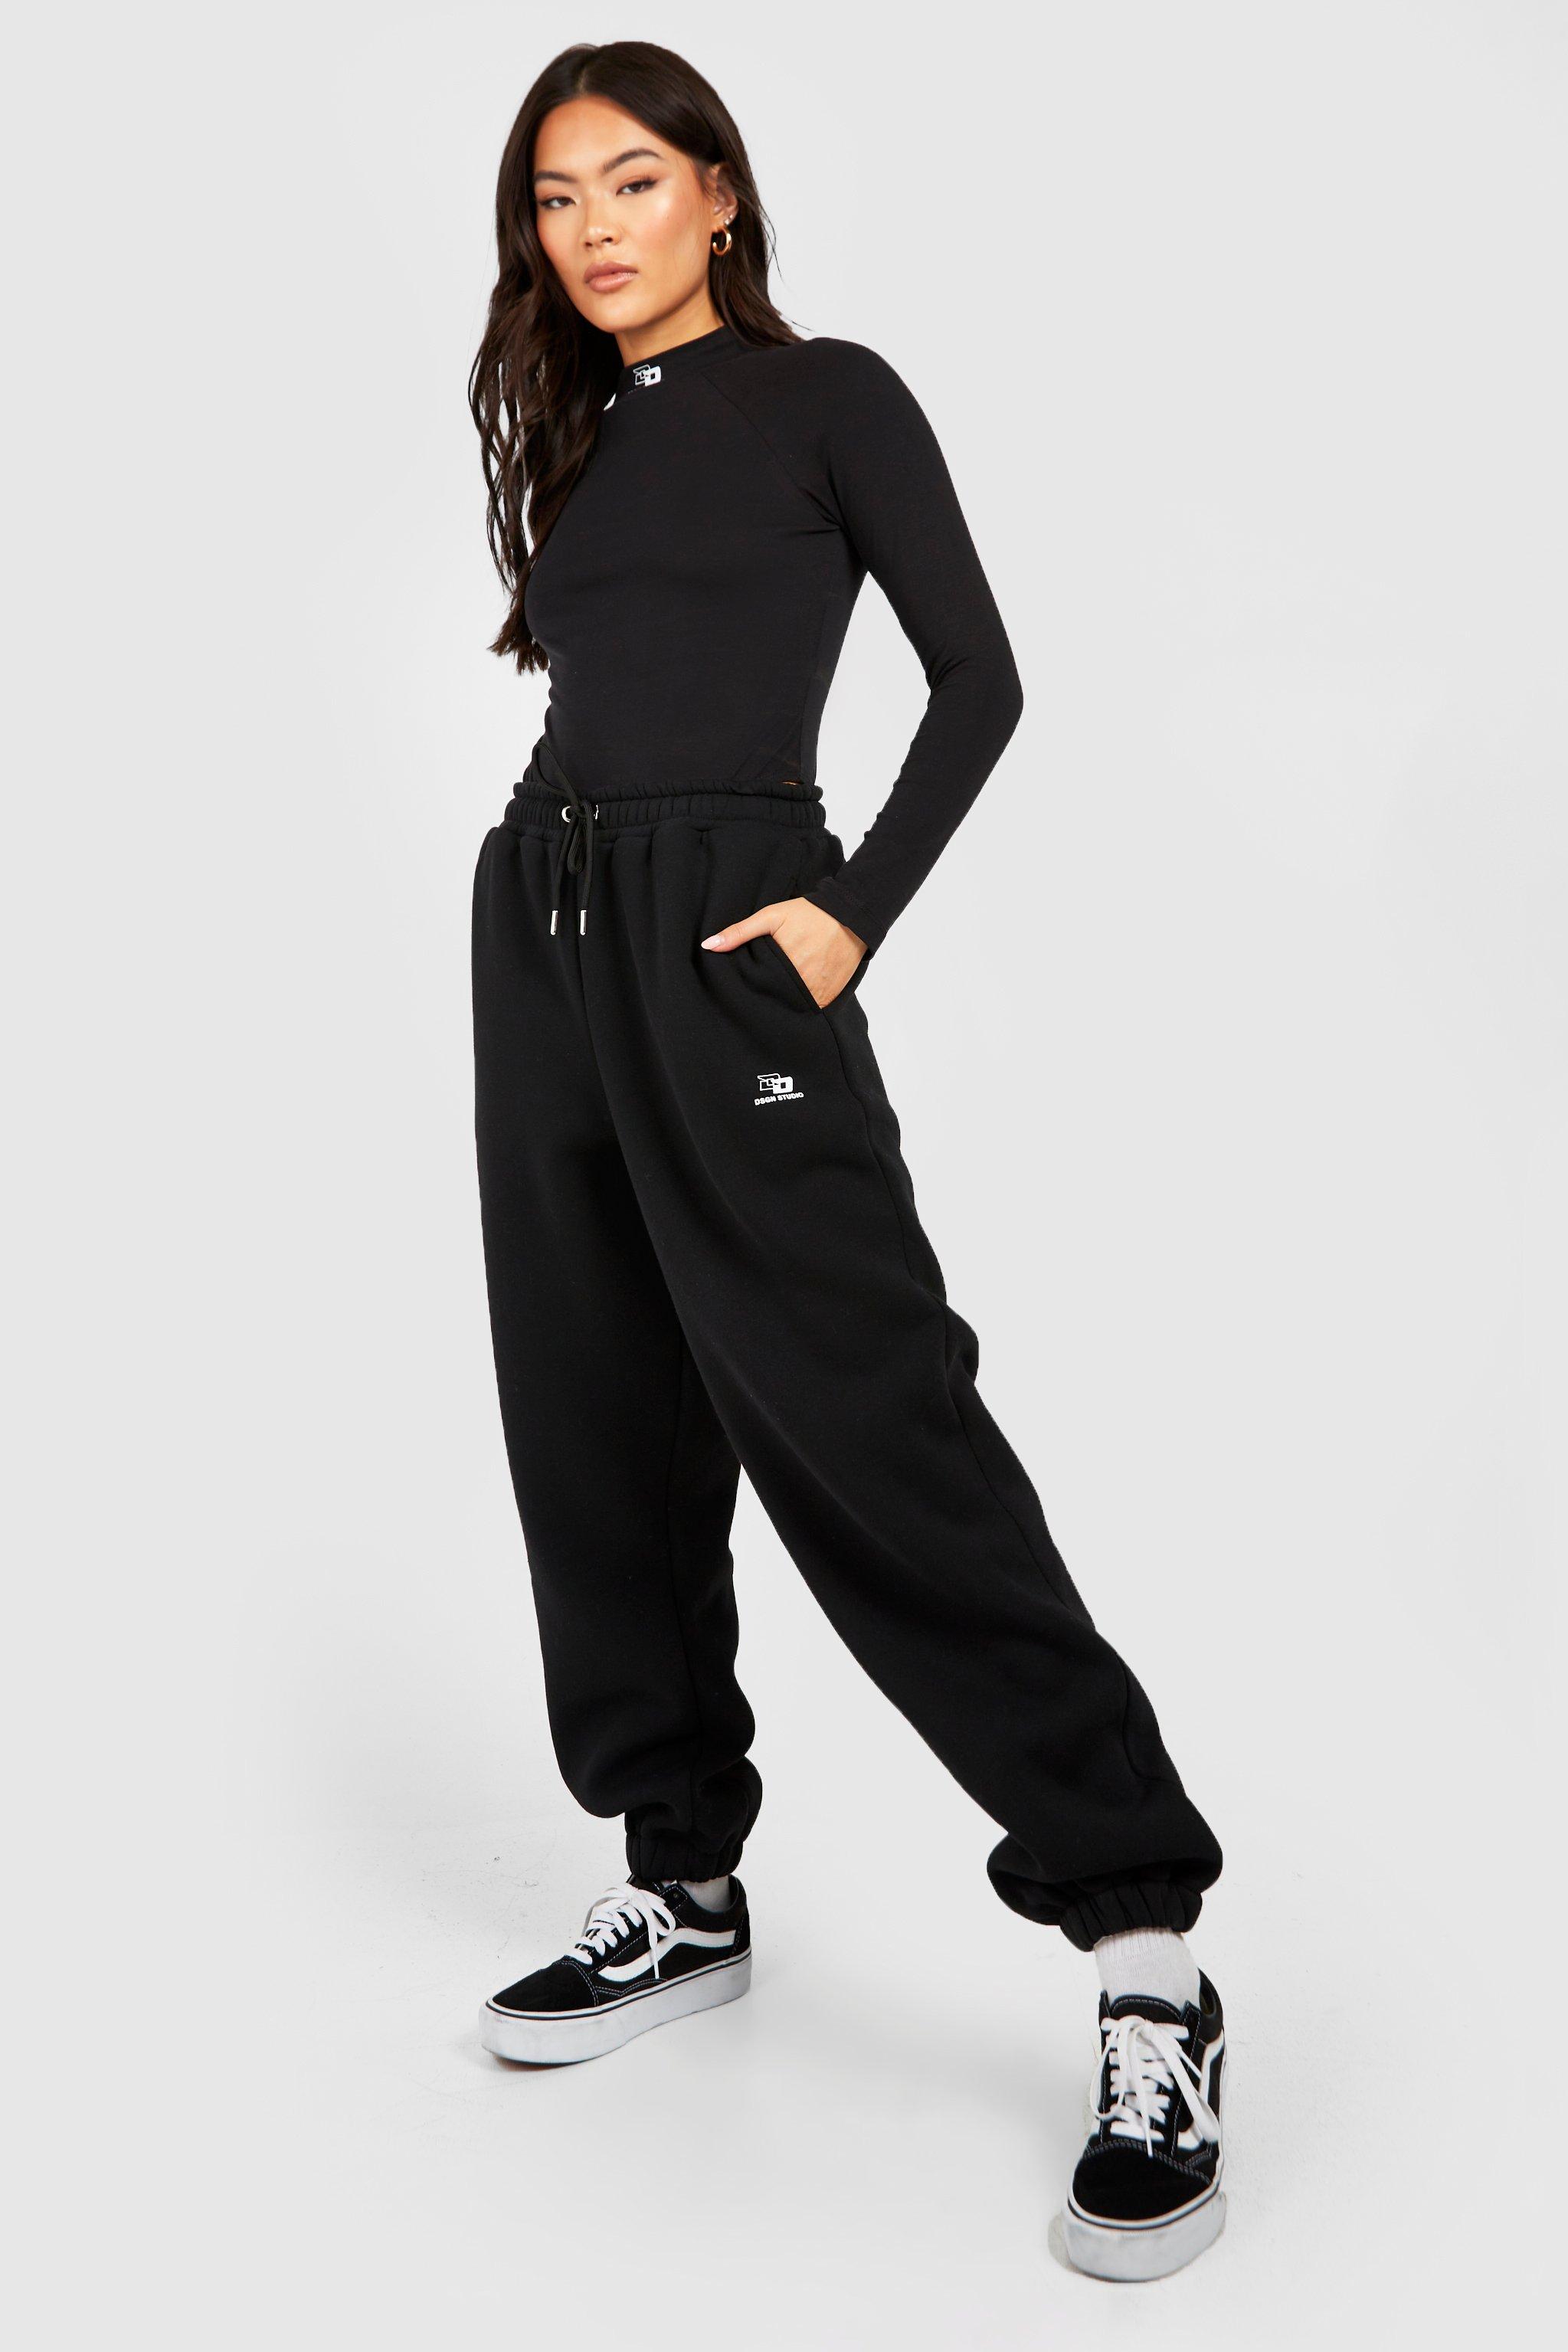 Ribbed Square Neck Bodysuit And Jogger Set